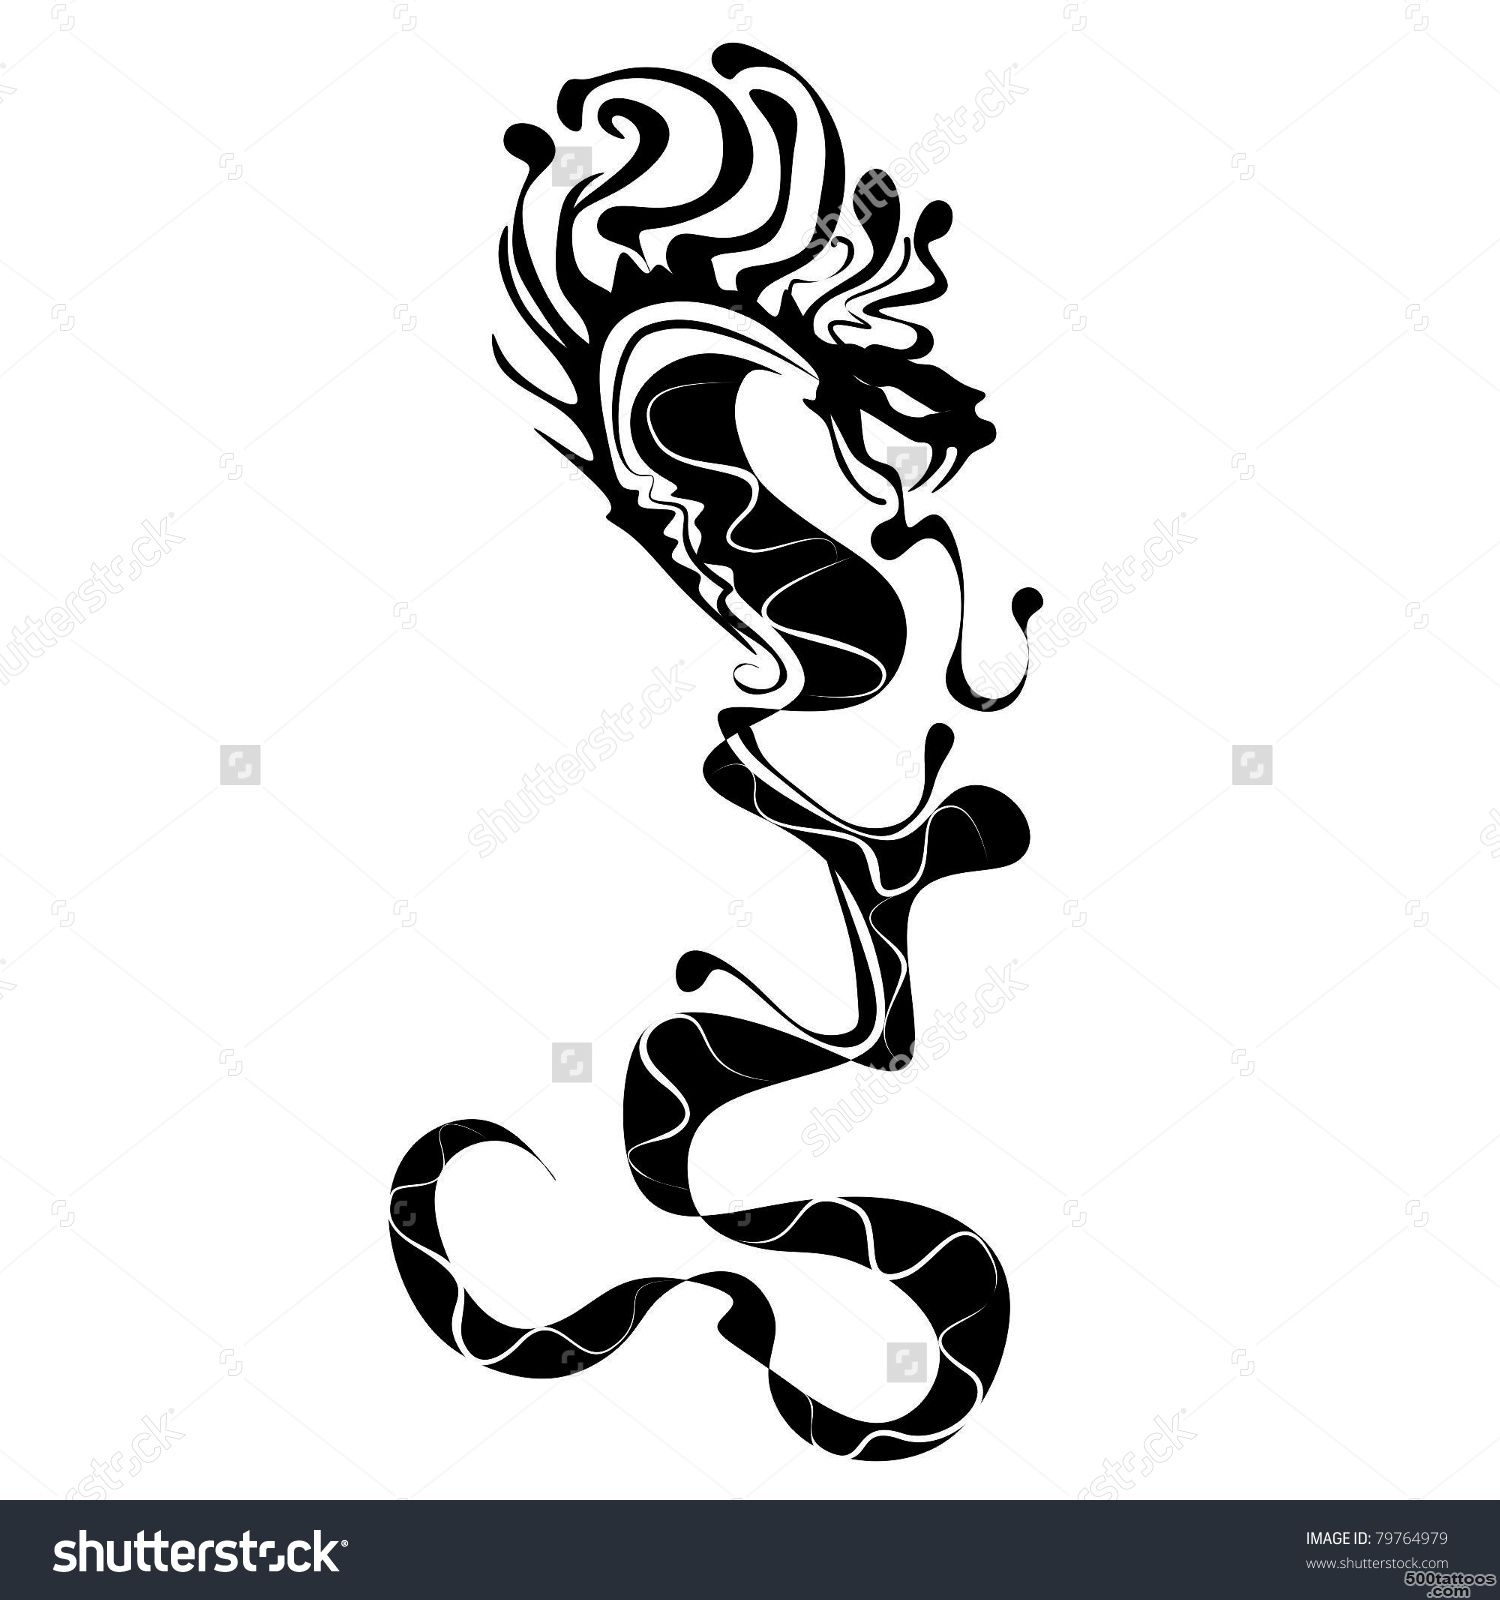 Snake Tattoo Stock Photos, Images, amp Pictures  Shutterstock_32